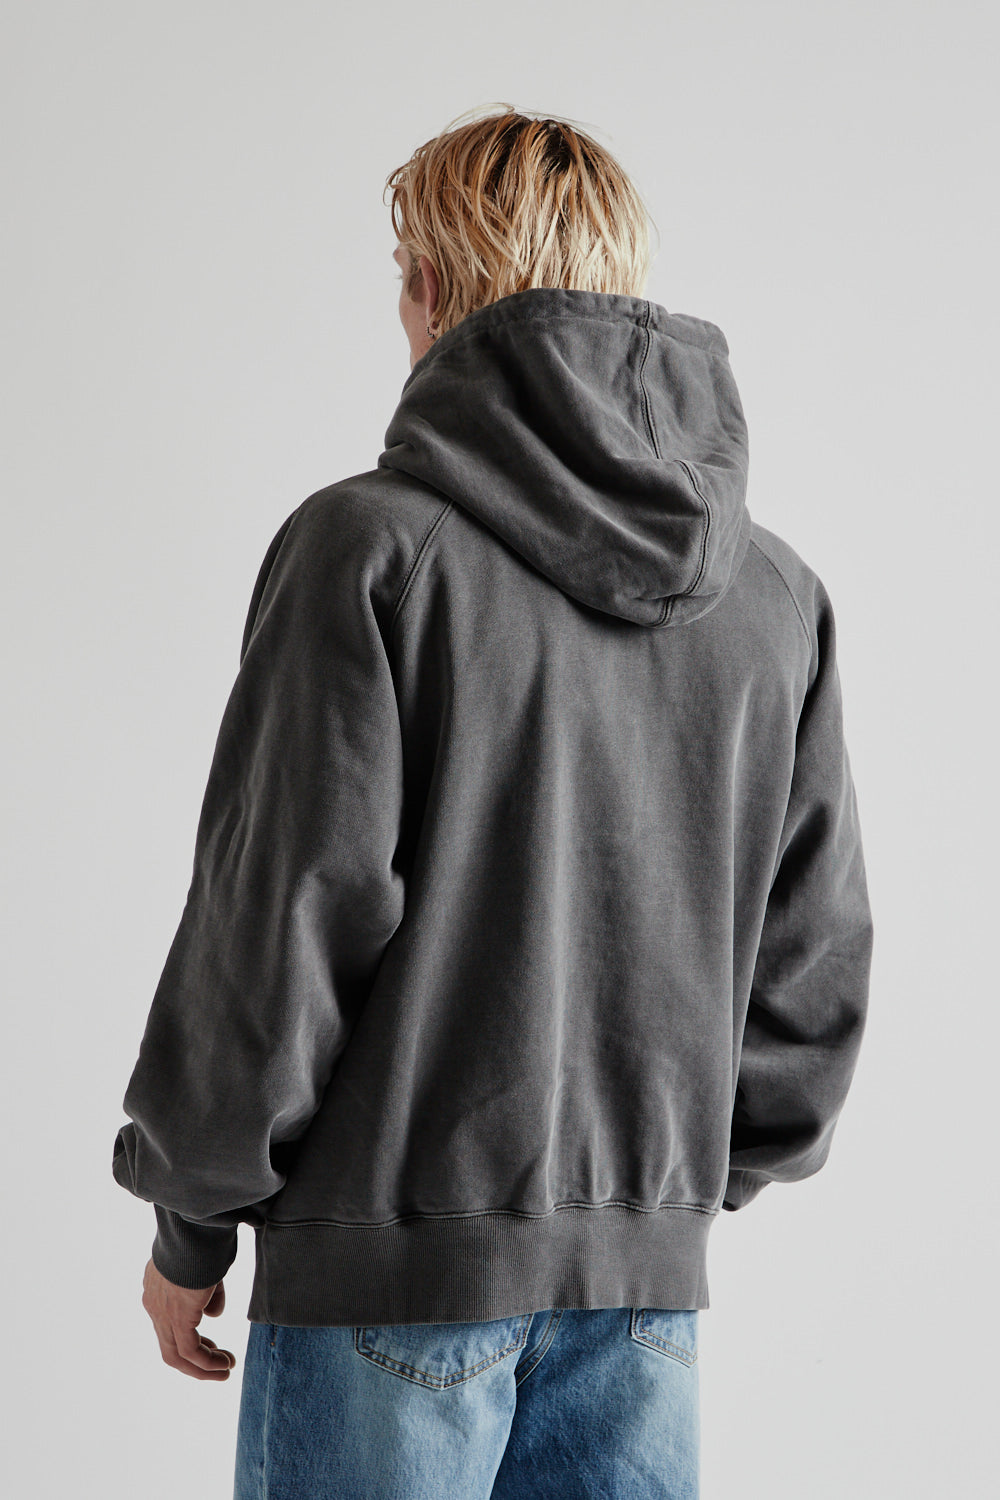 Frizmworks OG Pigment Dyeing Hoodie in Charcoal